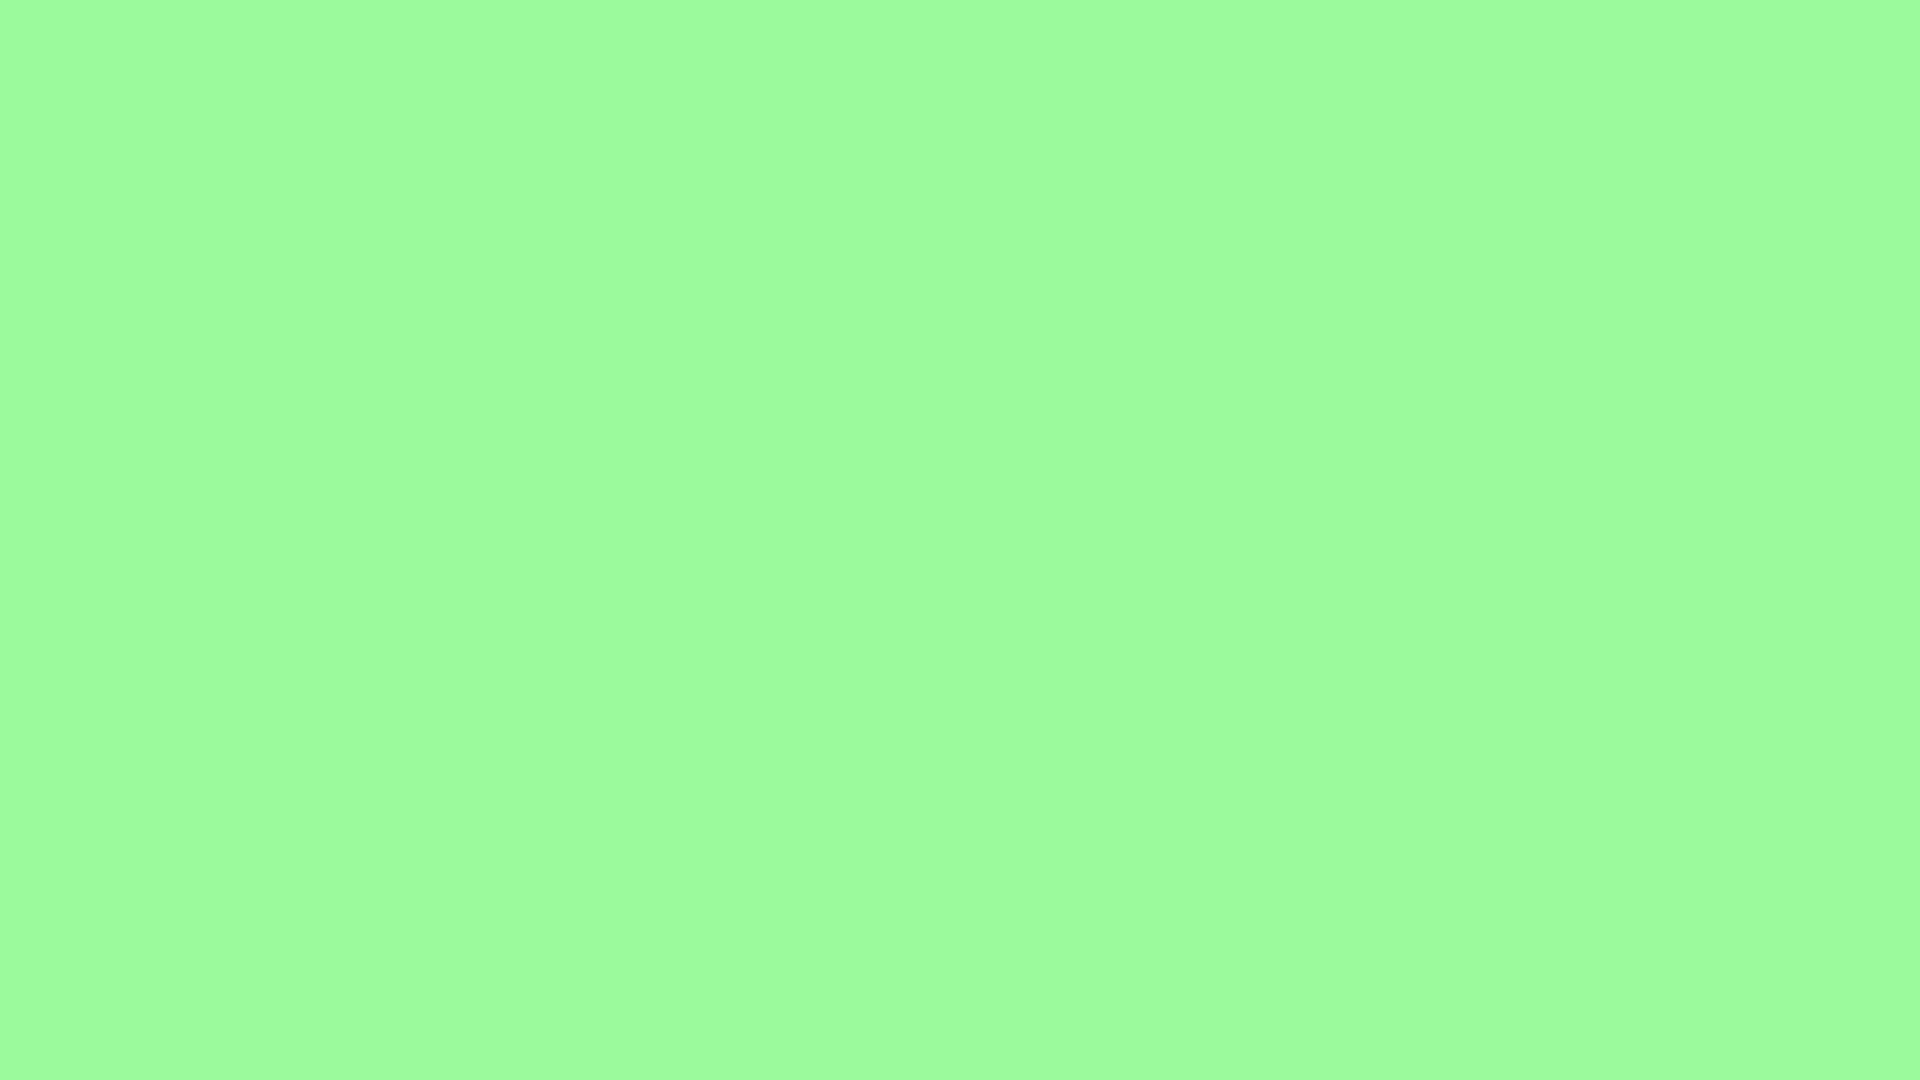 Plain Soid Pale Green Bhackground Image: Free Download Vector, Image, PNG, PSD Files